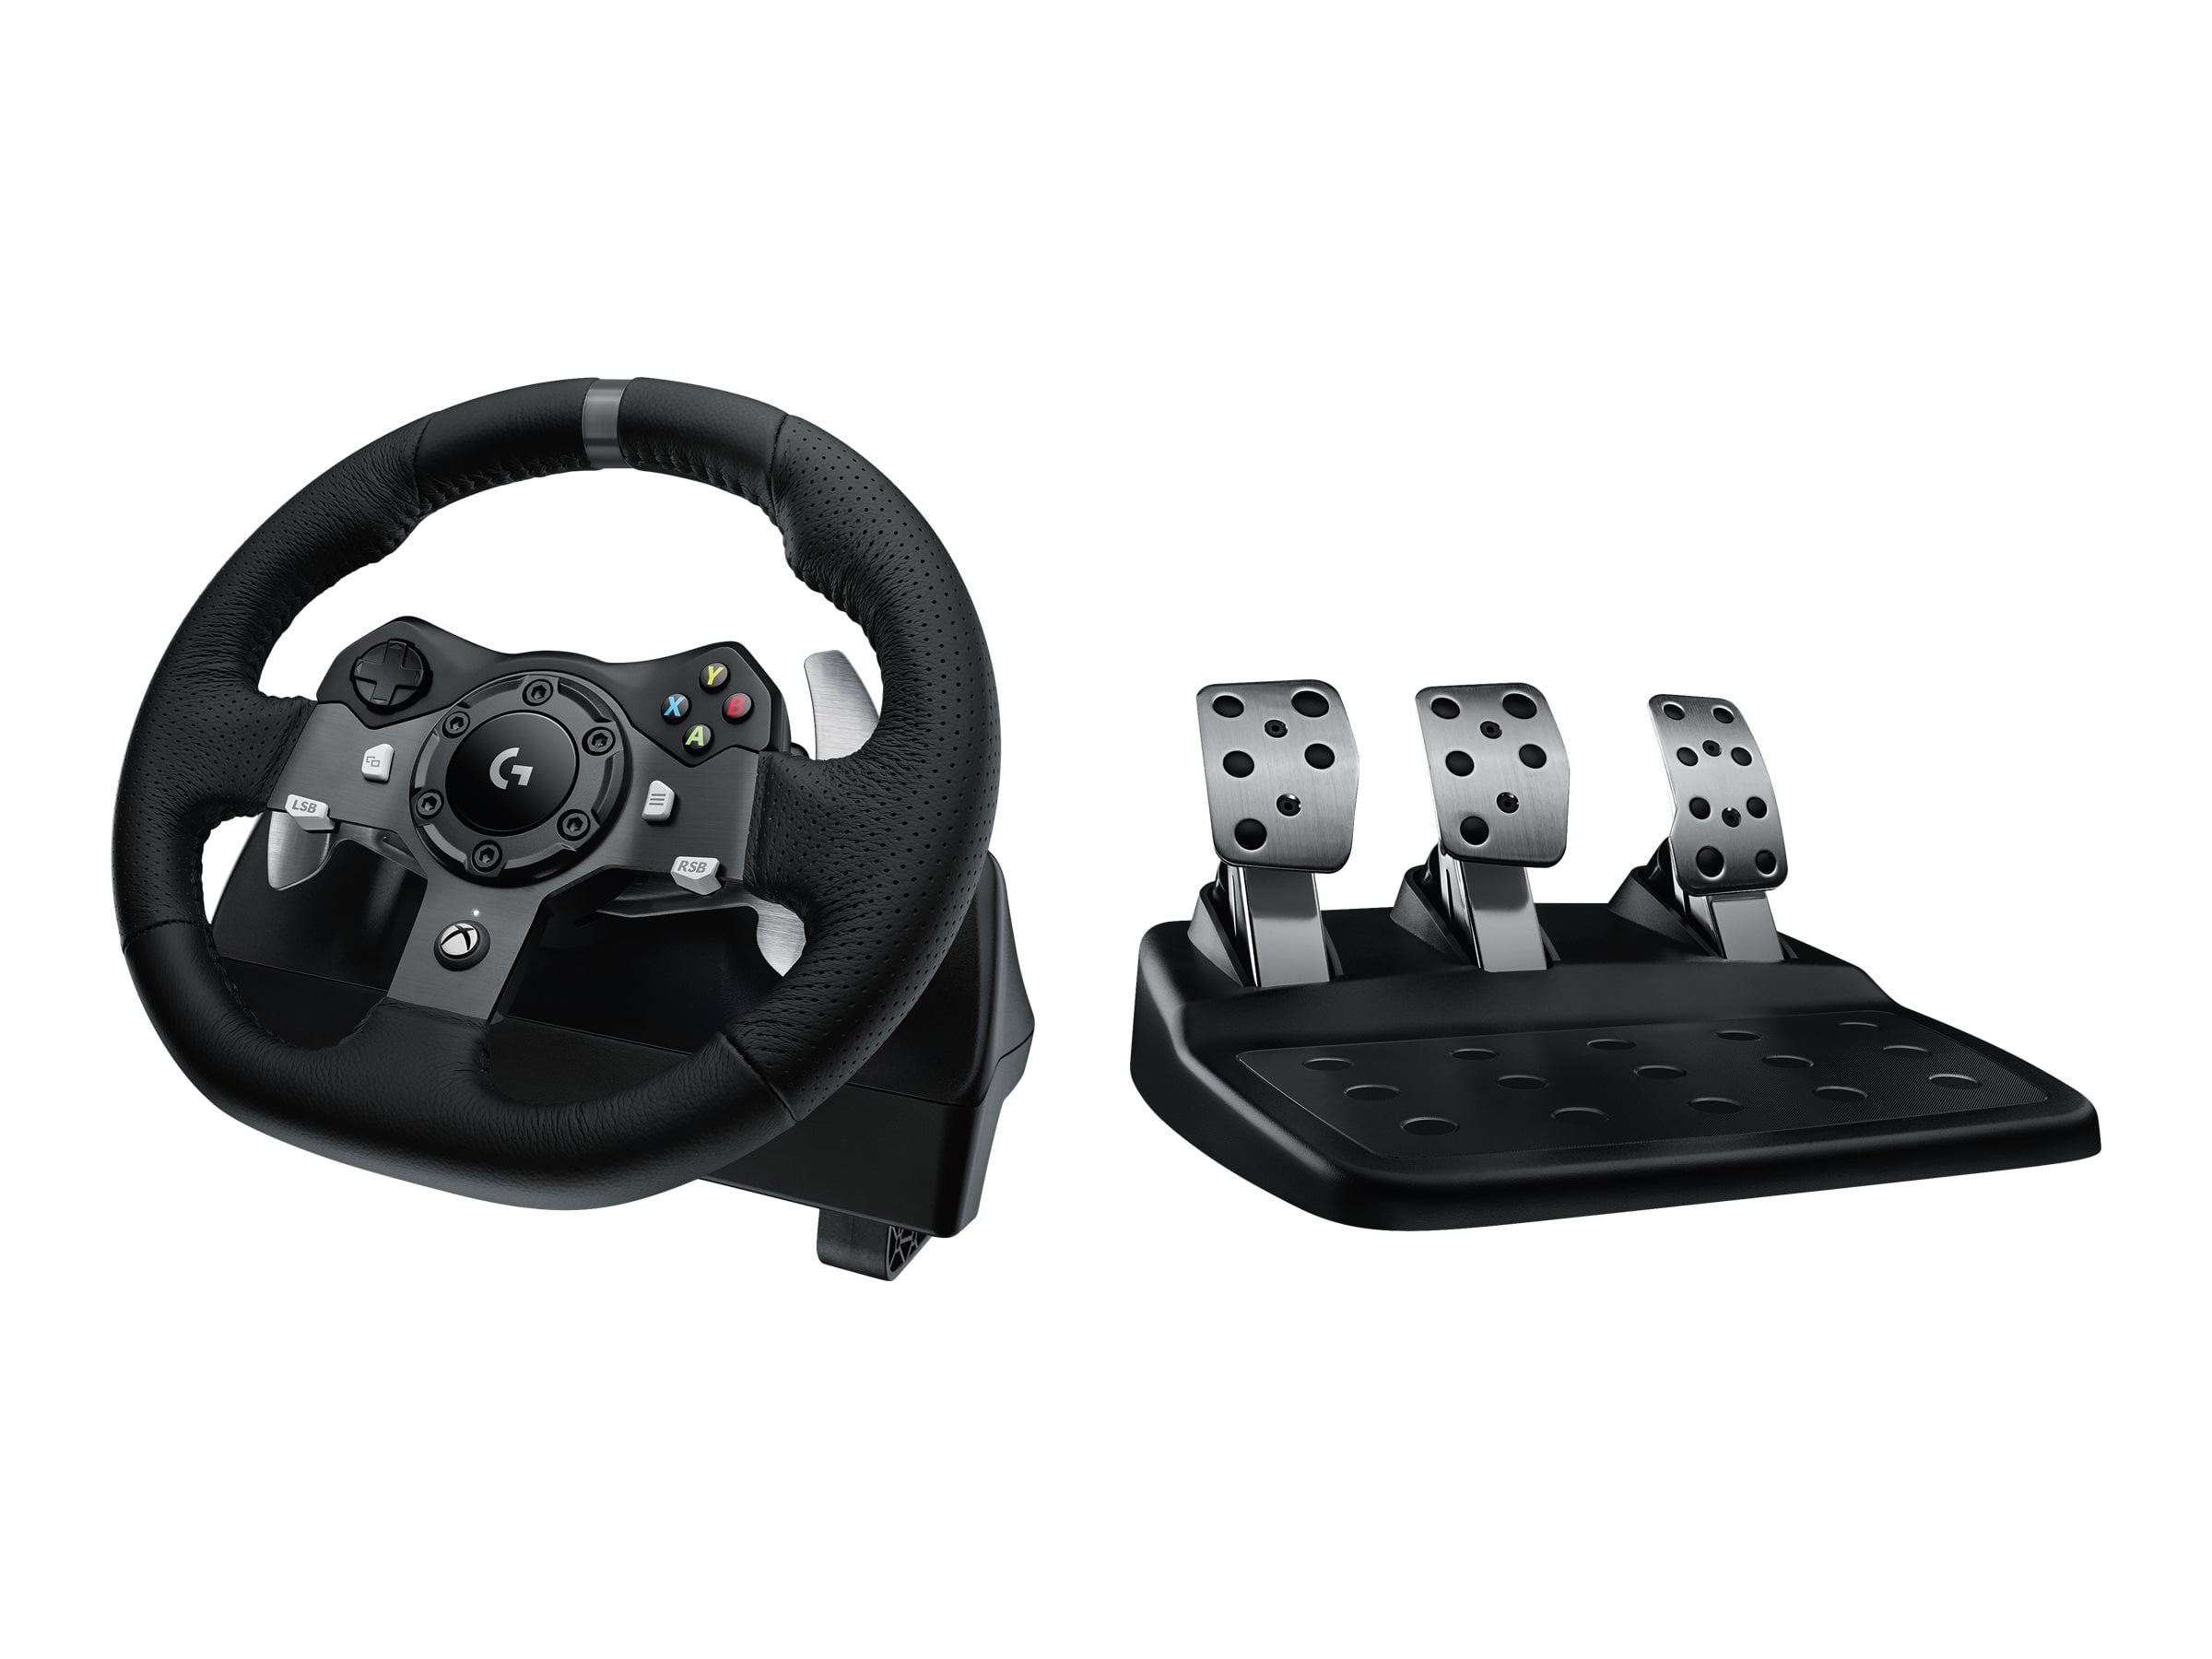 Logitech G920 Driving Force Racing Wheel for Xbox One and Windows 